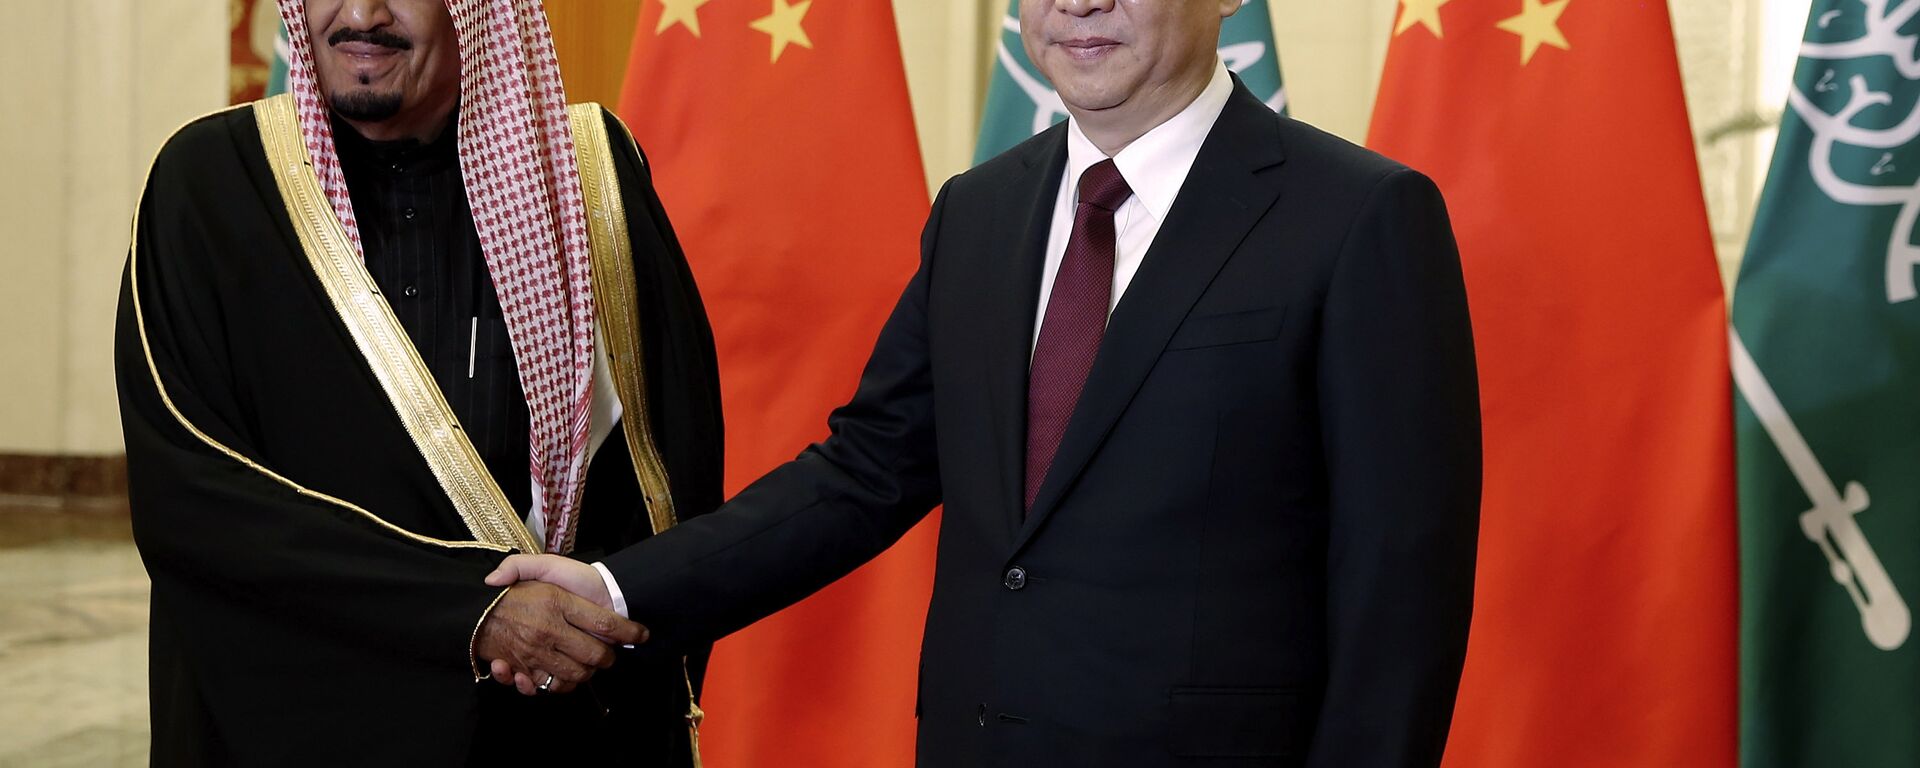 Chinese President Xi Jinping, right, shakes hands with Saudi Prince Salman bin Abdul-Aziz as they pose for photos at the Great Hall of the People in Beijing, China, Thursday, March 13, 2014 - Sputnik International, 1920, 07.11.2022